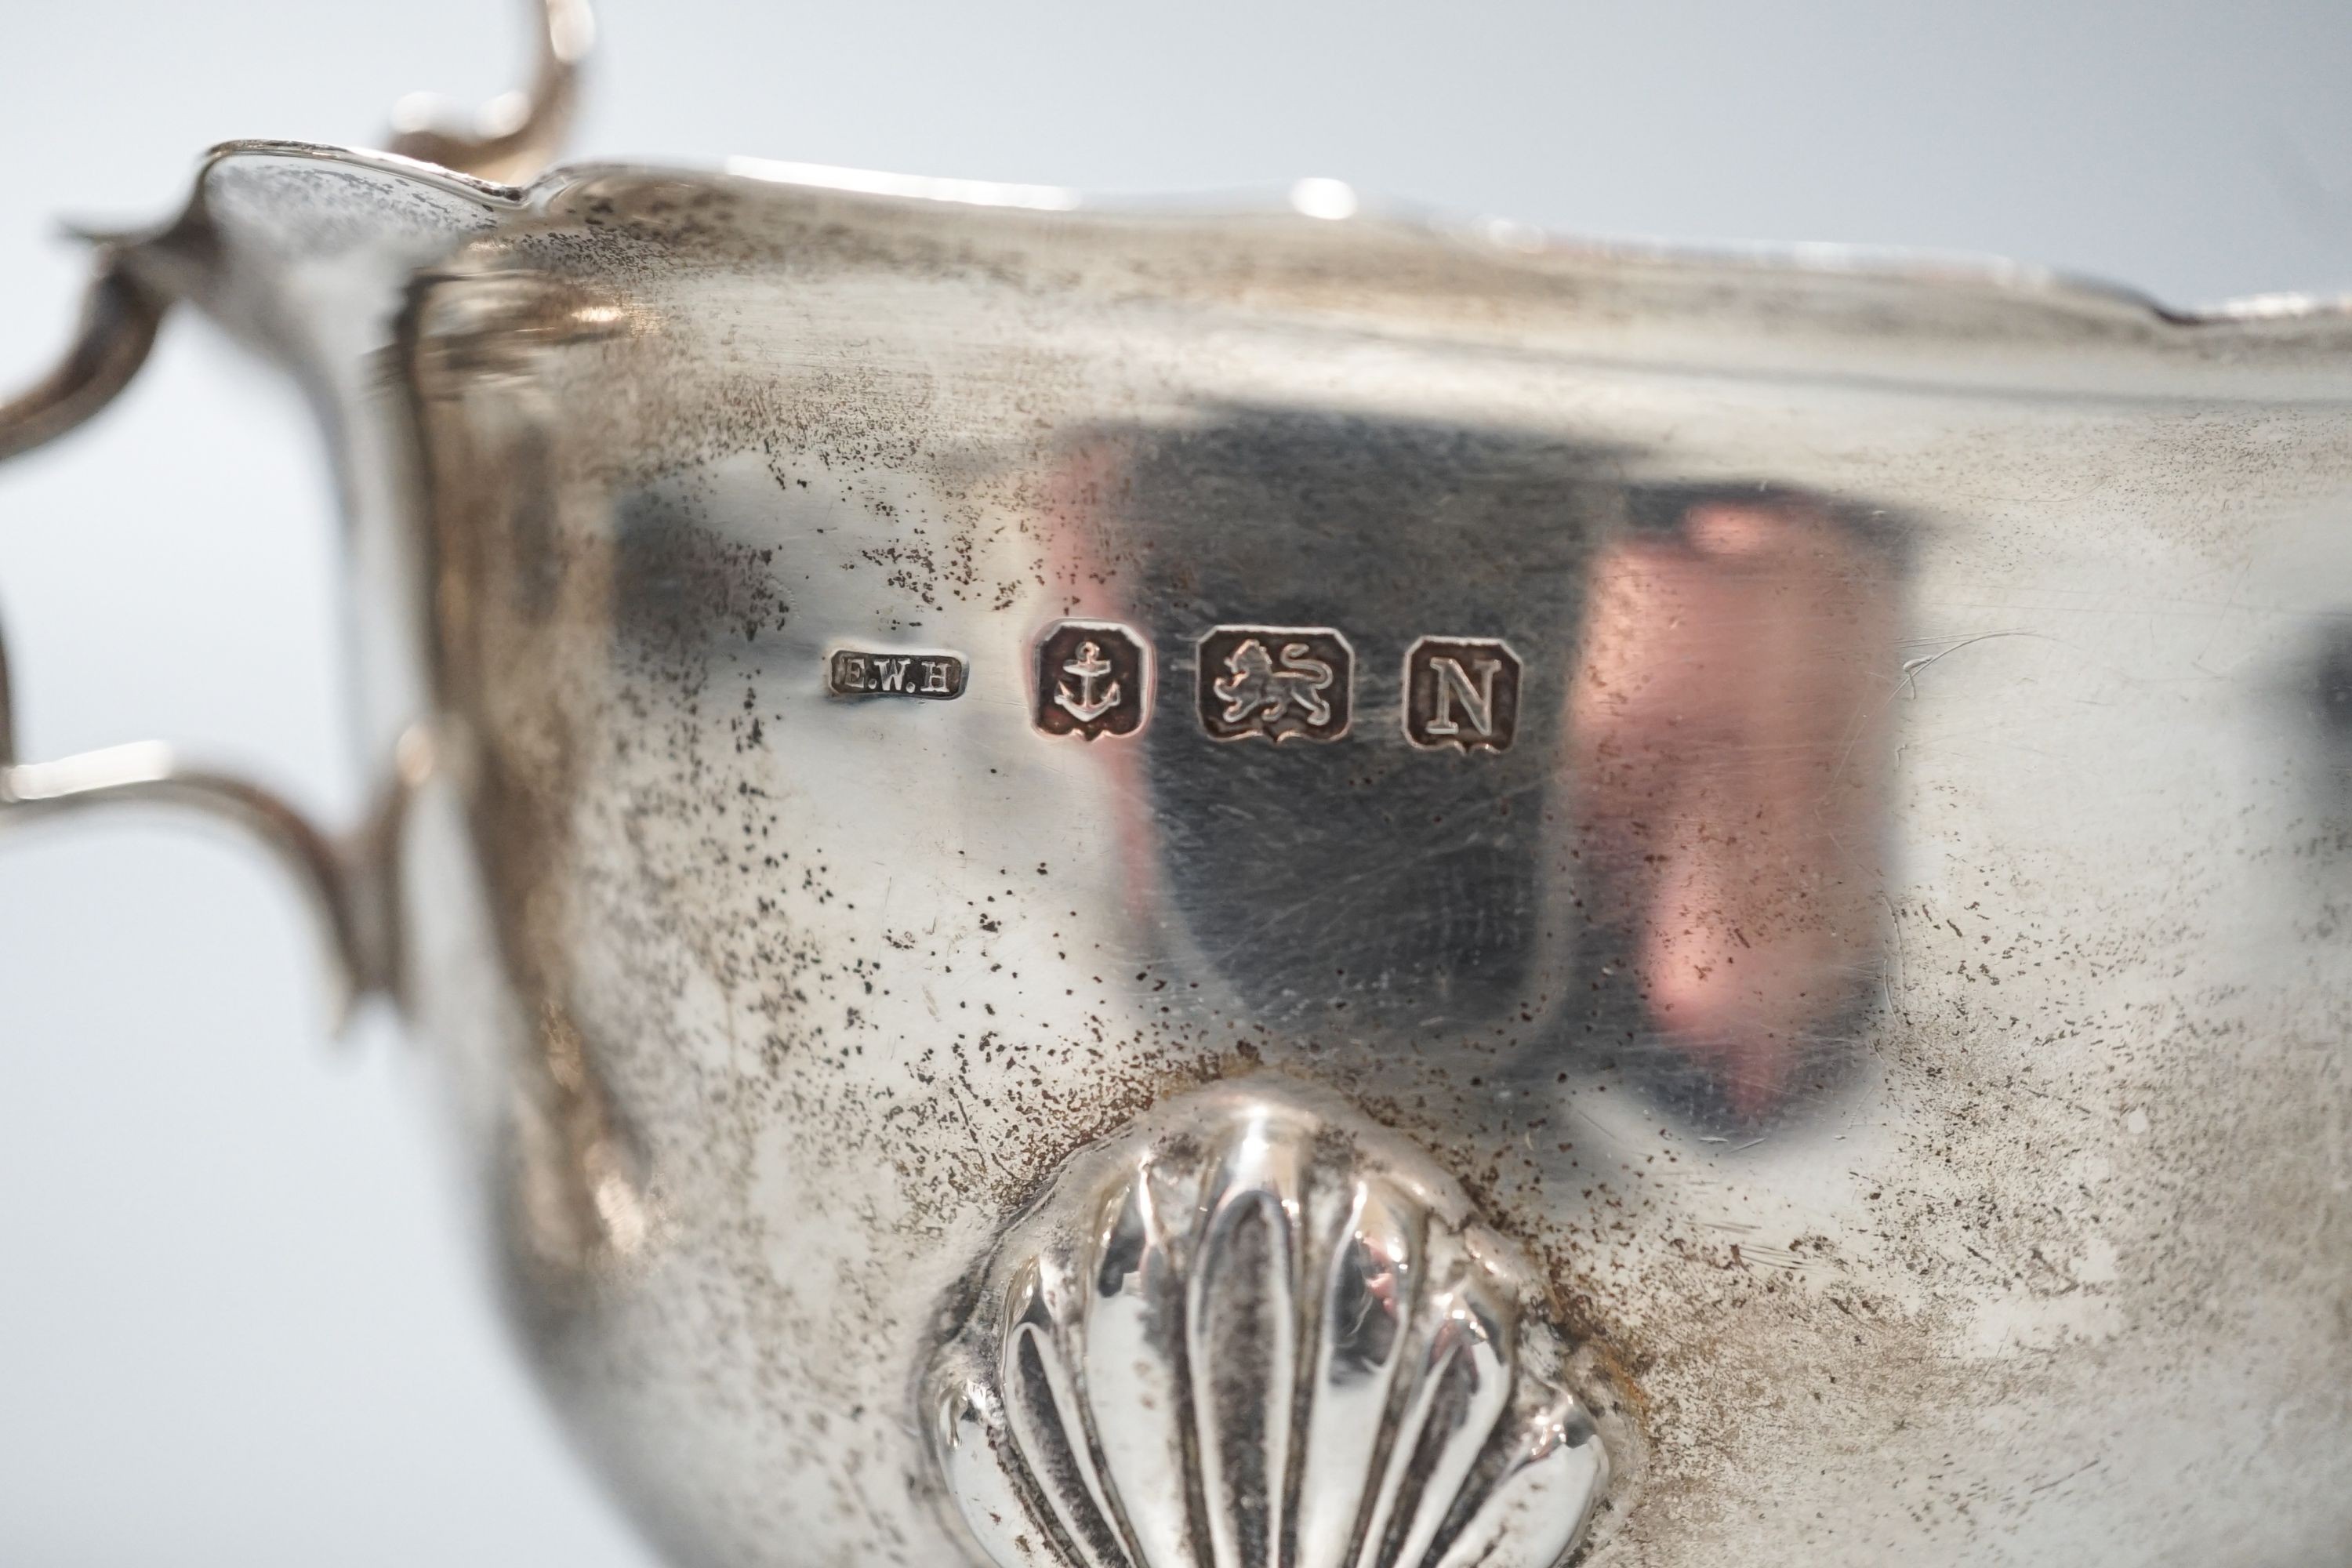 An Edwardian silver cream jug, Chester, 1904 and a late silver sauce boat, 9.5oz.